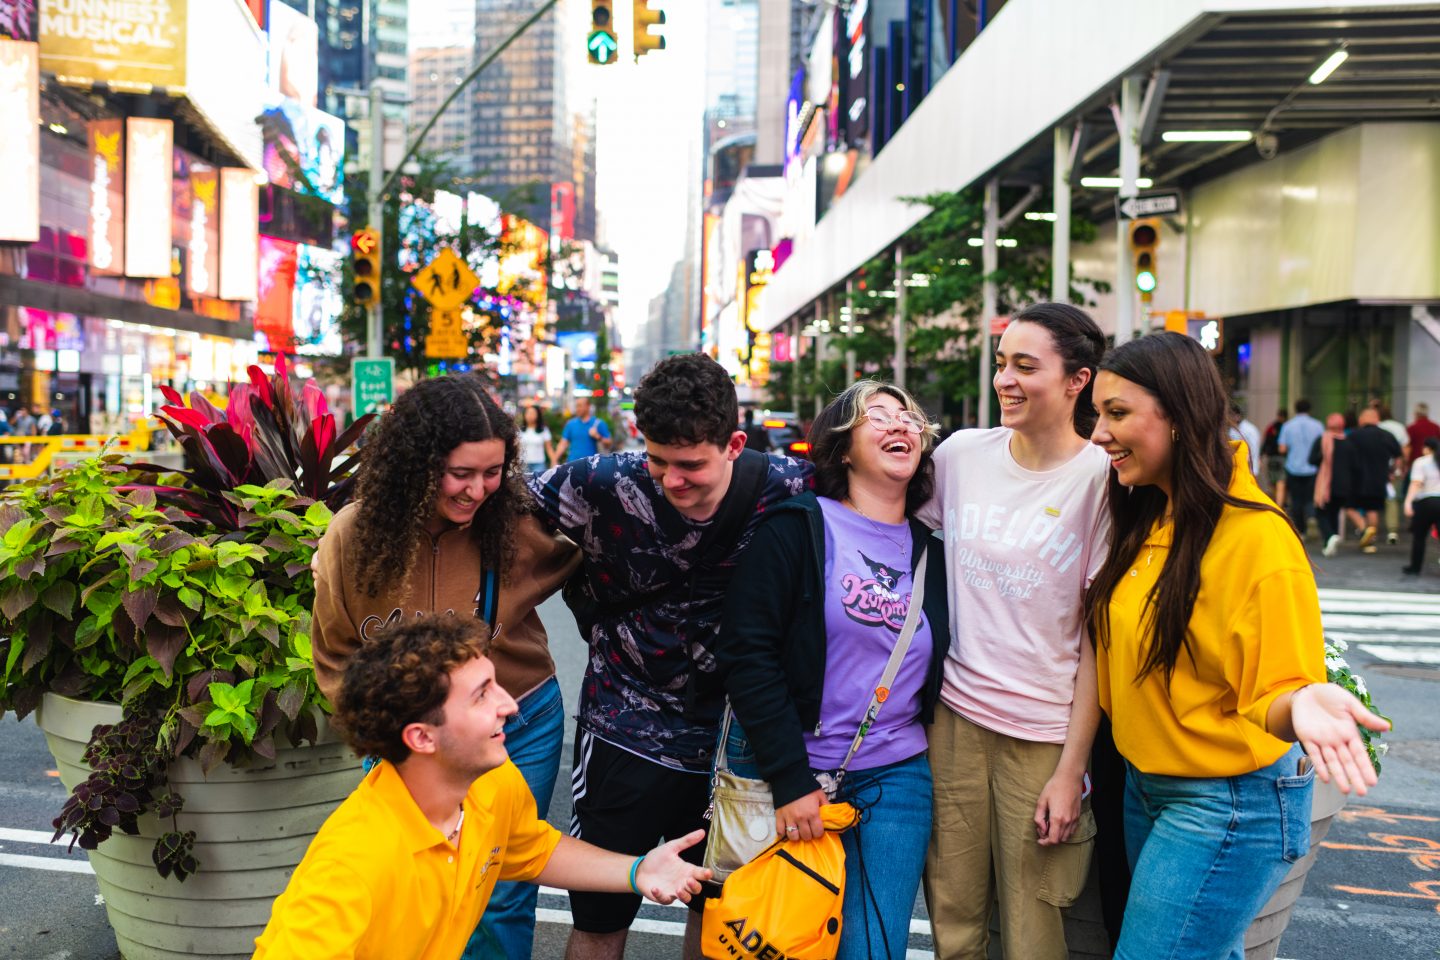 Casually dressed young adults are laughing and smiling at one another in Times Square with colorful billboards, bright lights and skyscrapers in the background